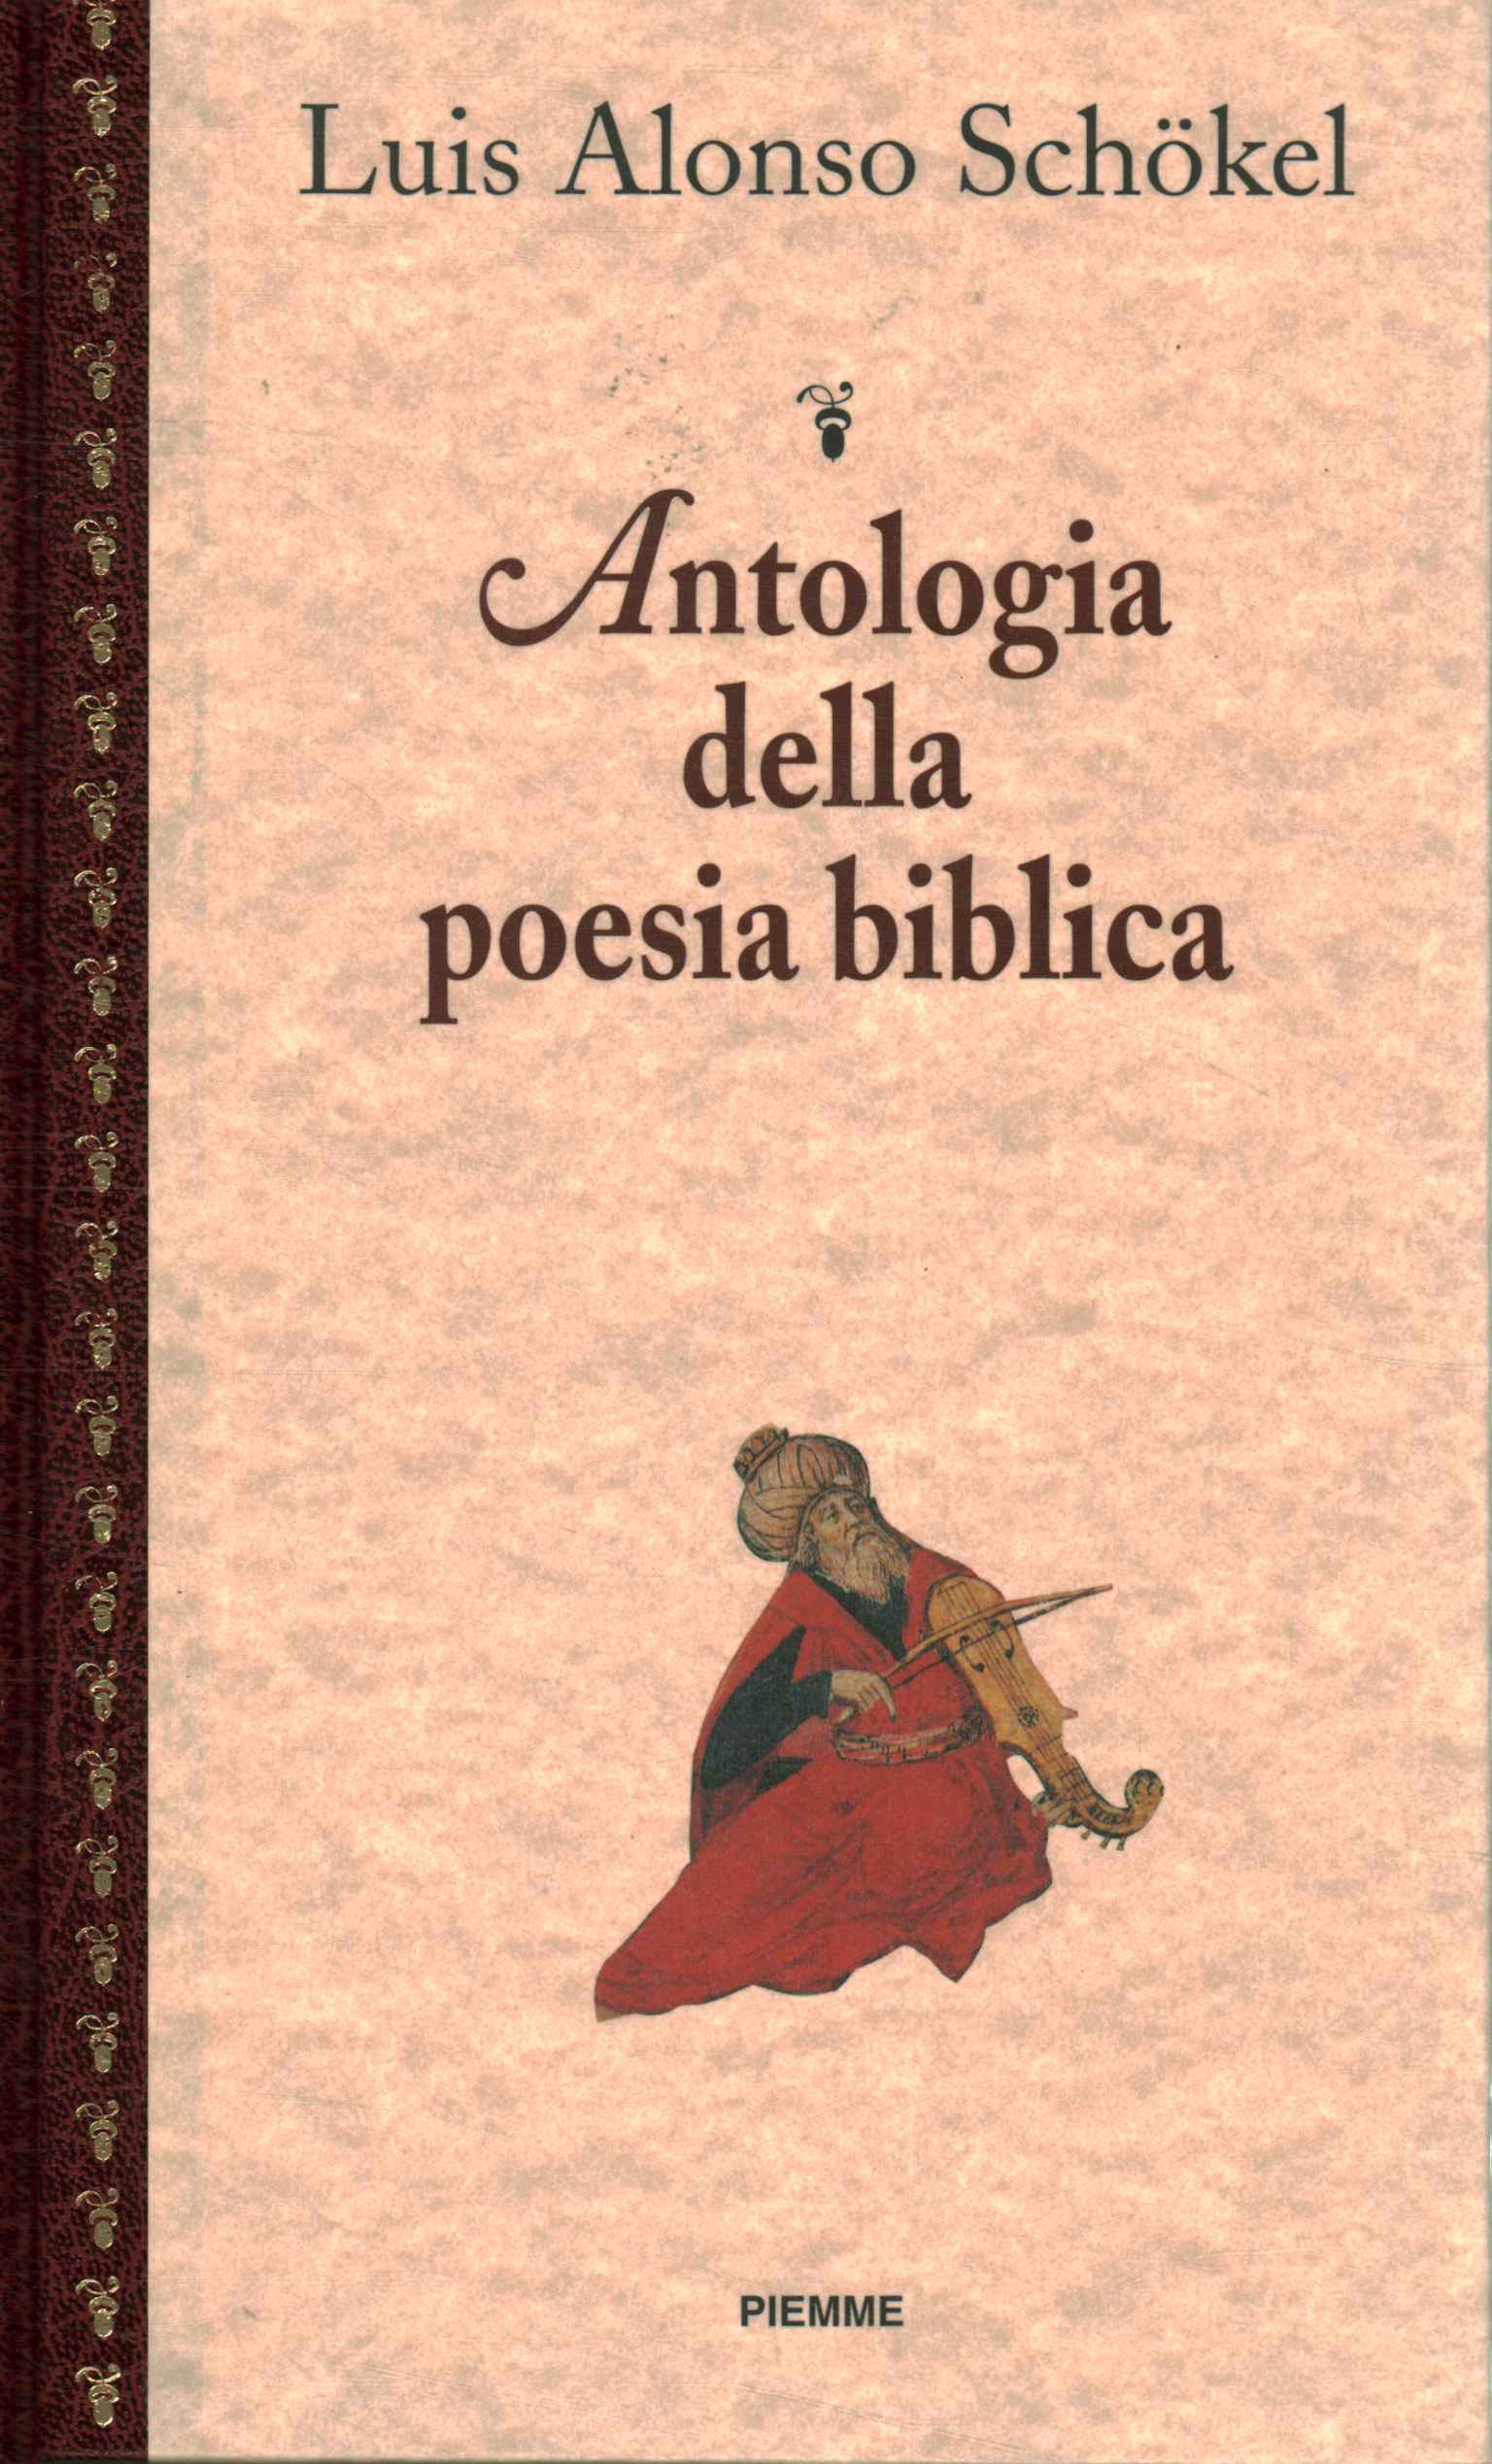 Anthology of biblical poetry